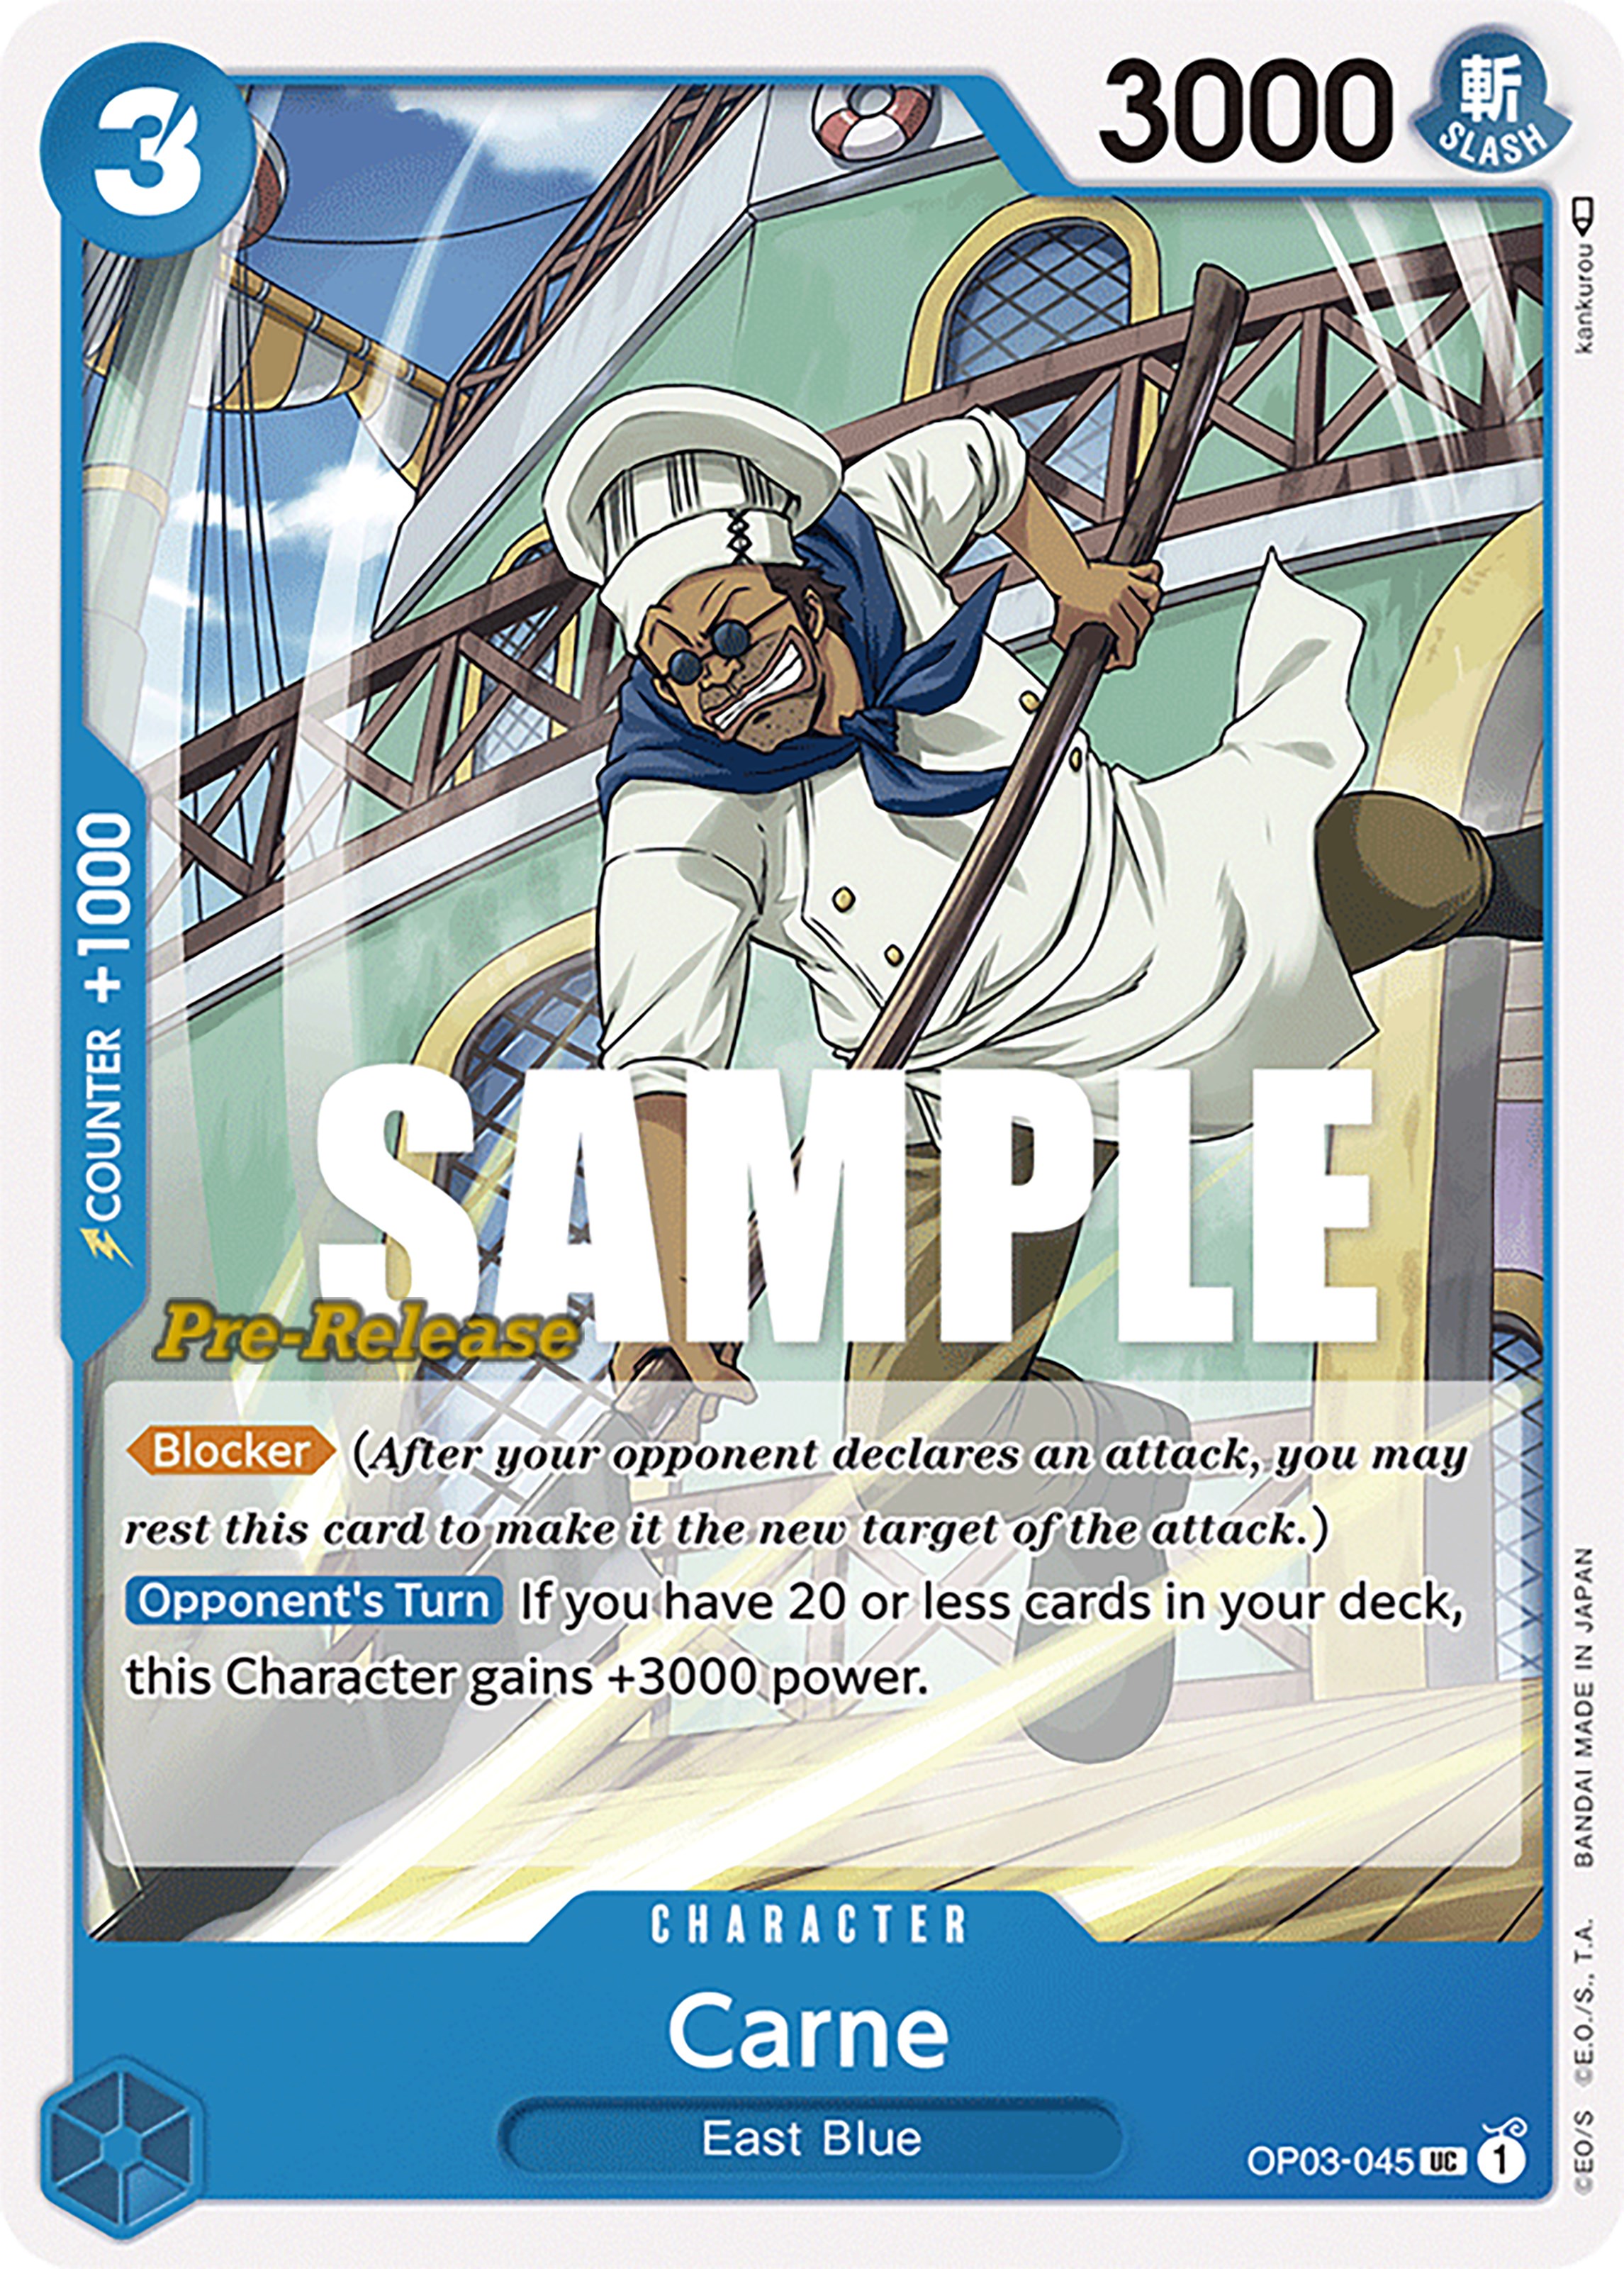 Carne - Pillars of Strength Pre-Release Cards - One Piece Card Game